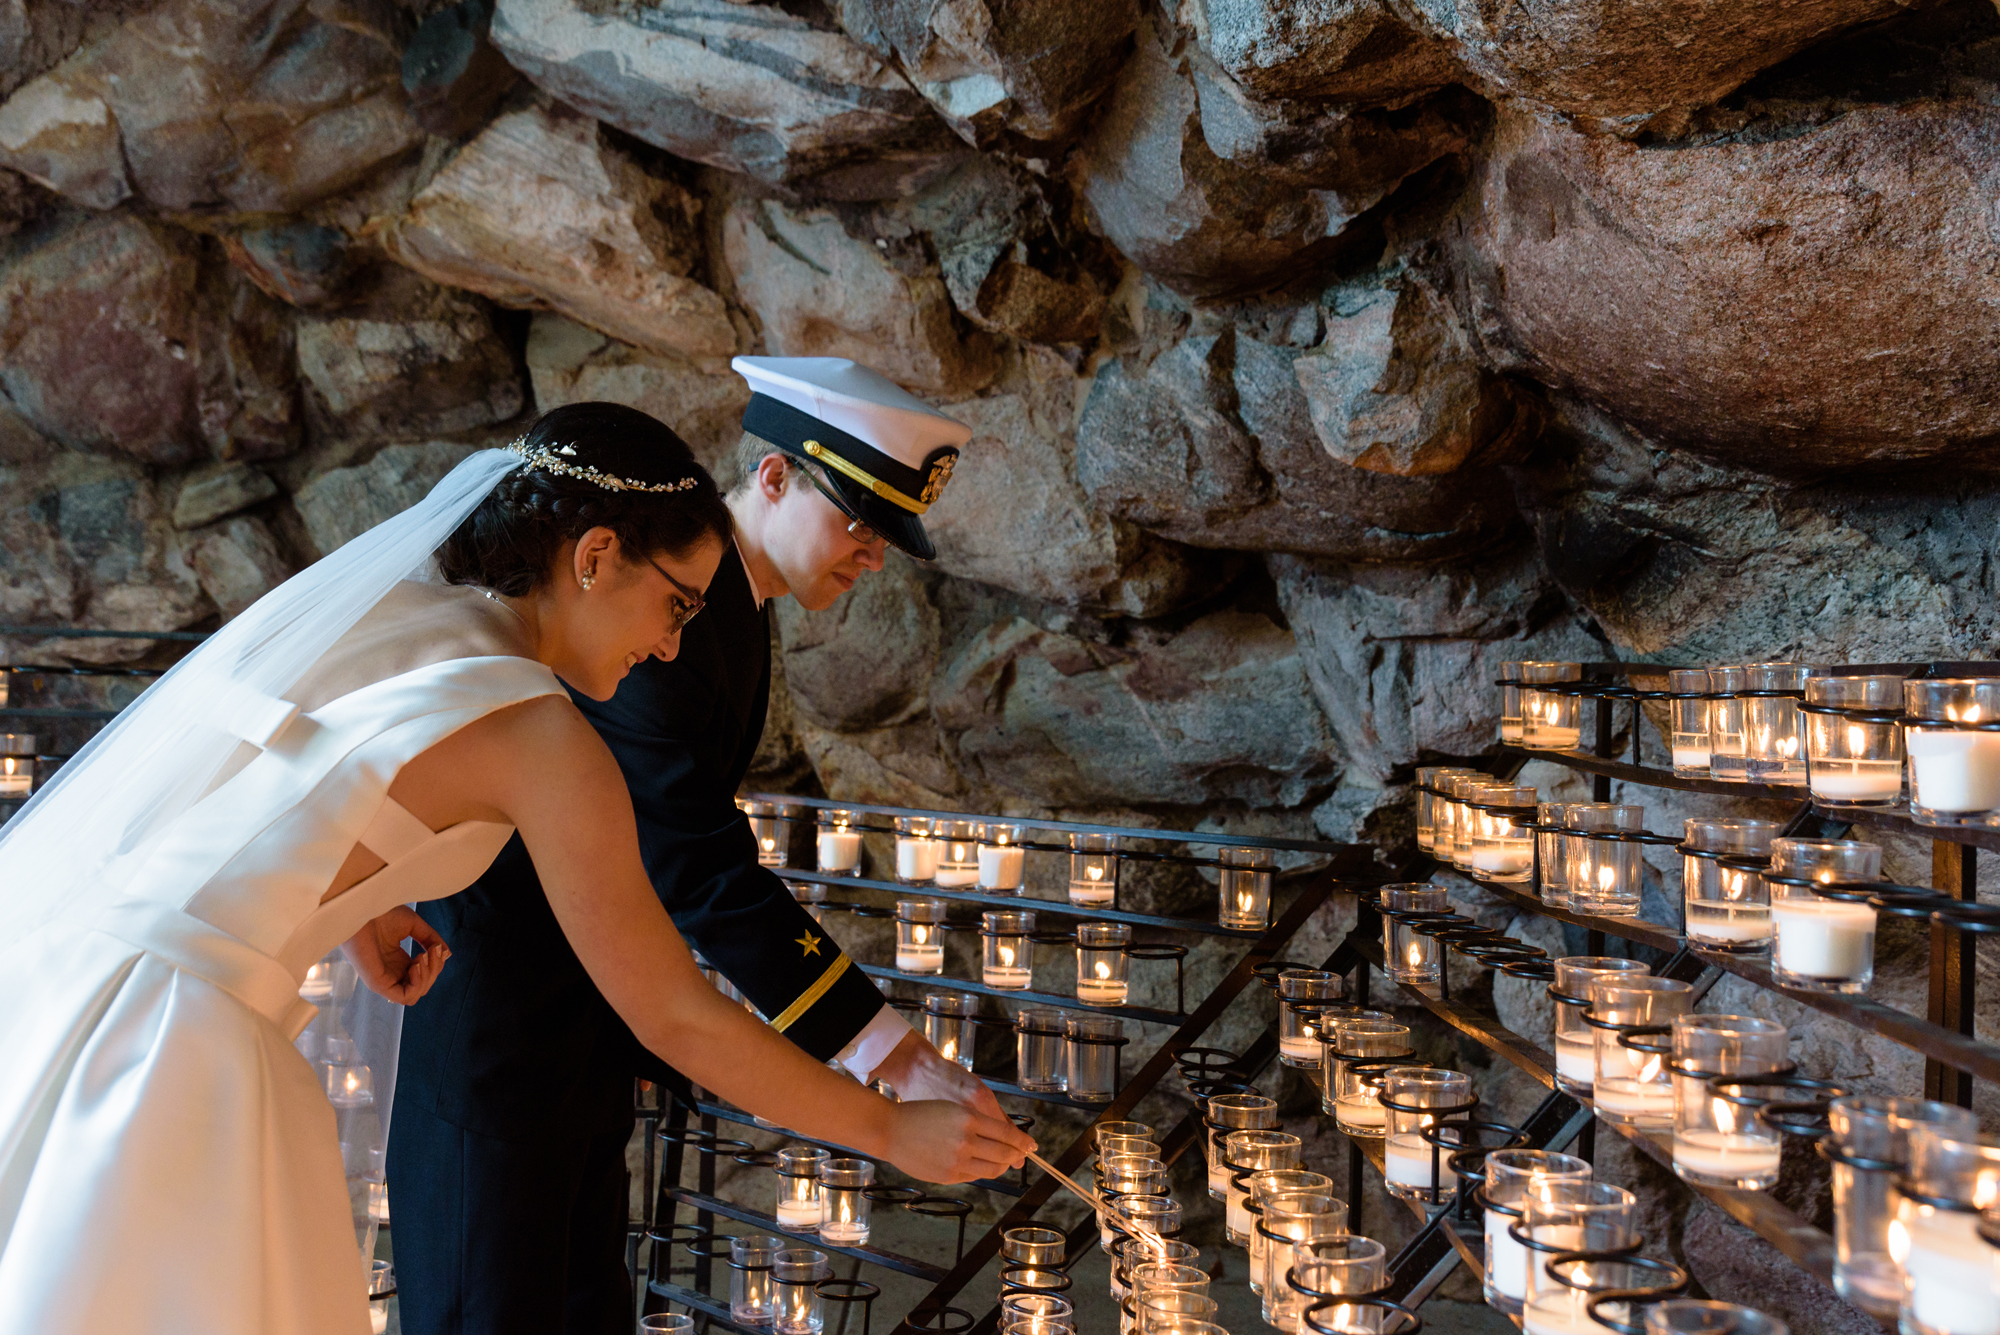 Bride & Groom Lighting a candle at the Grotto after their wedding ceremony at the Basilica of the Sacred Heart on the campus of the University of Notre Dame